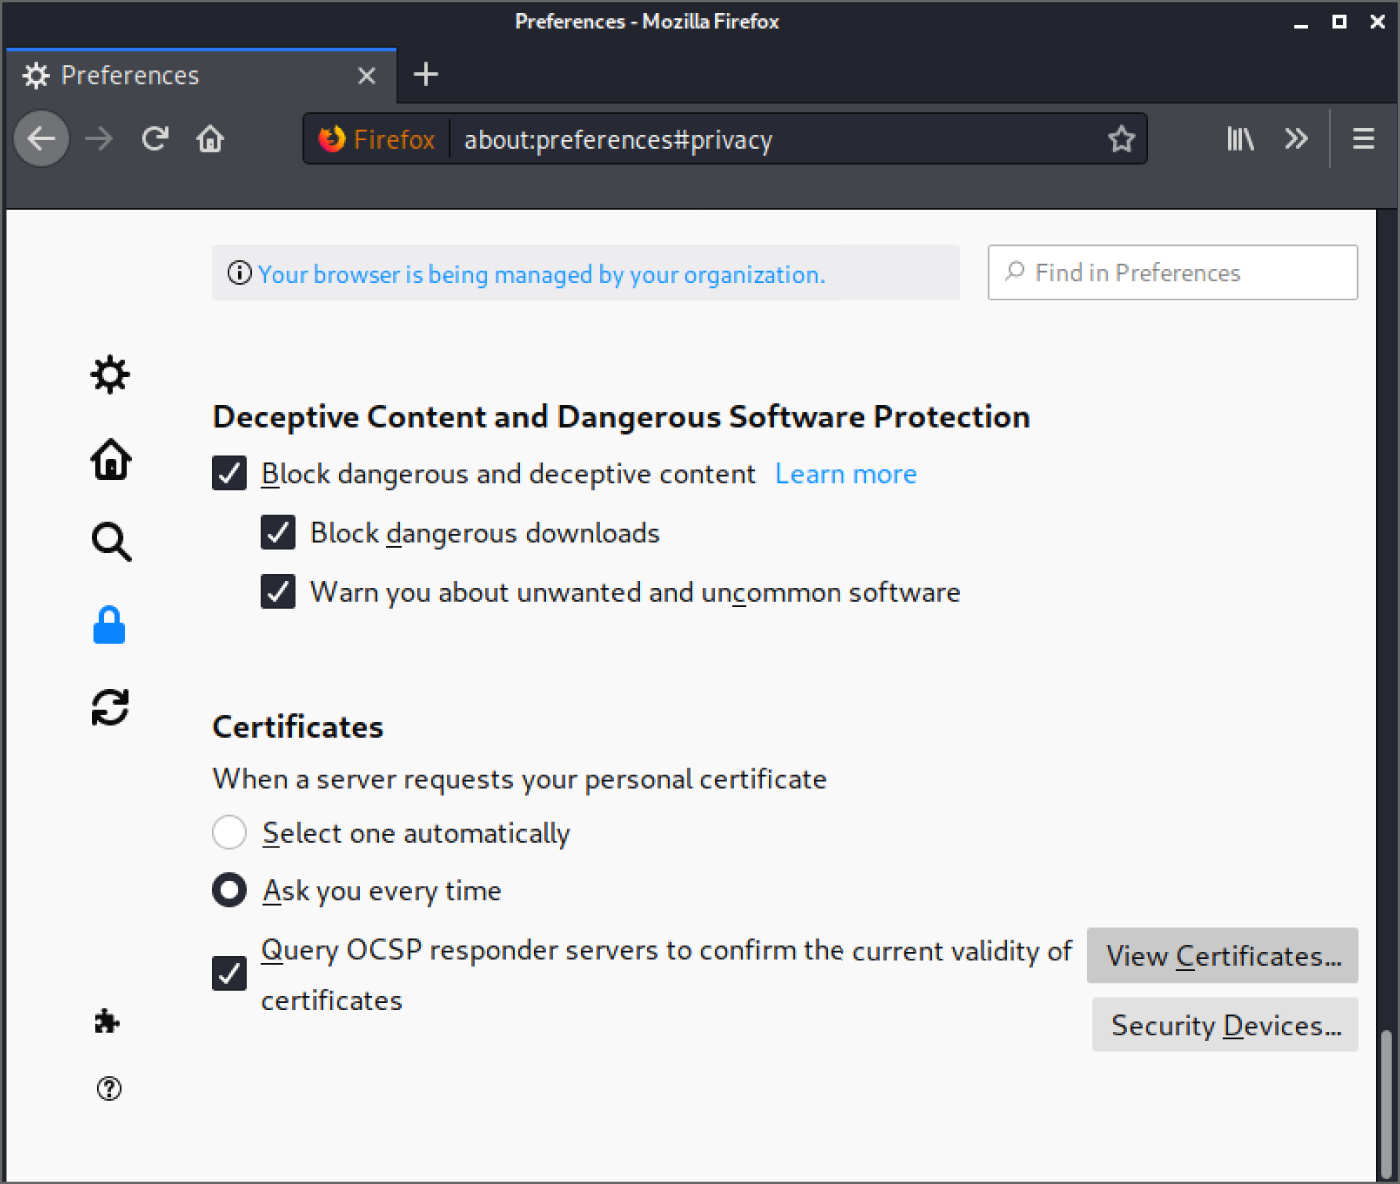 Snapshot of the Firefox's Privacy & Security preferences.